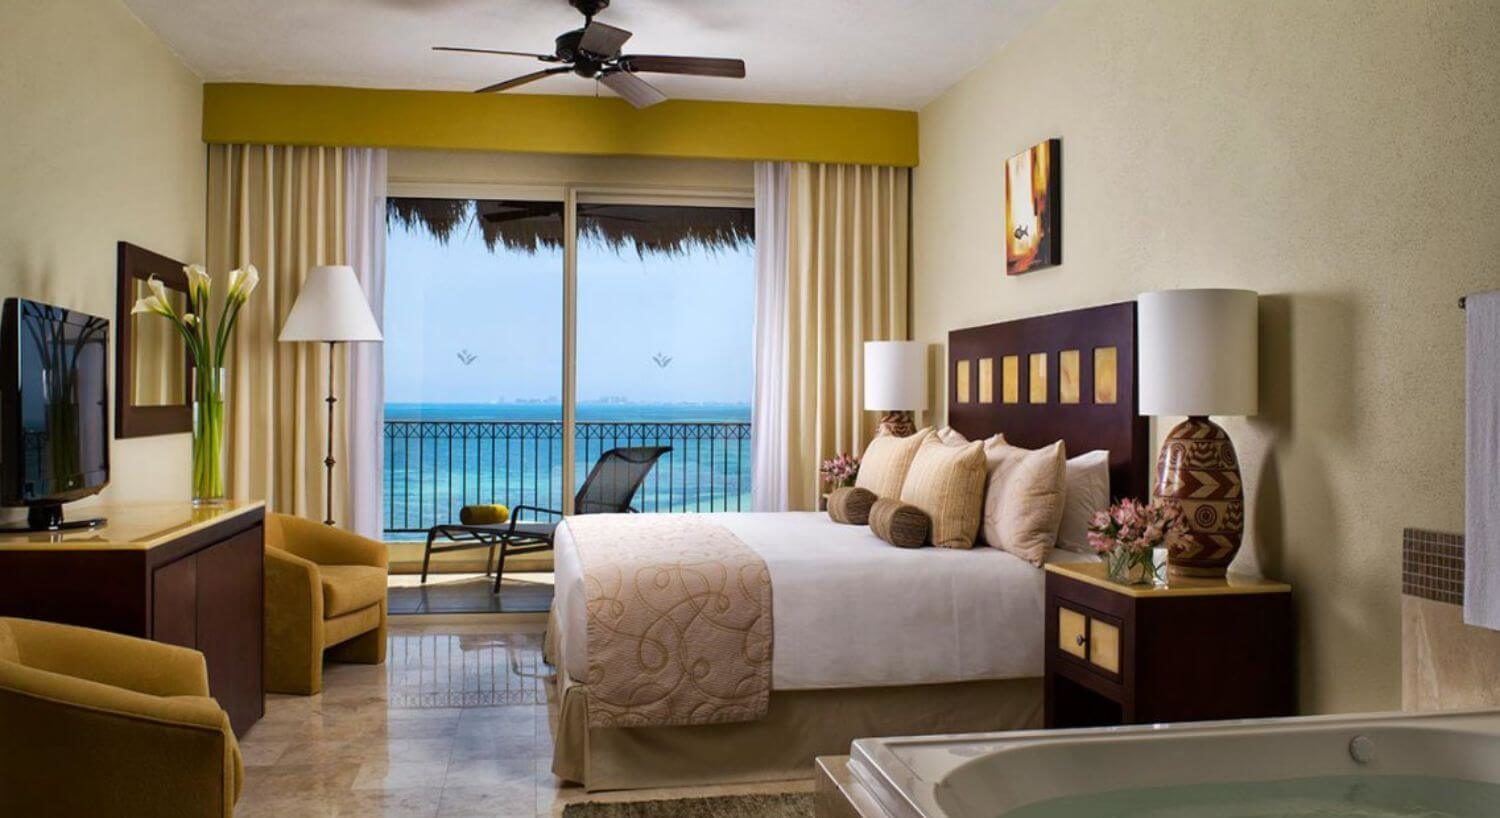 A bedroom with a King bed with white and tan bedding, a dark wood headboard, a dresser and flat screen TV on the opposite all, two comfortable armchairs, and part of a jacuzzi tub in the foreground. Sliding glass doors open out to a terrace with patio furniture and views of the the turquoise ocean.